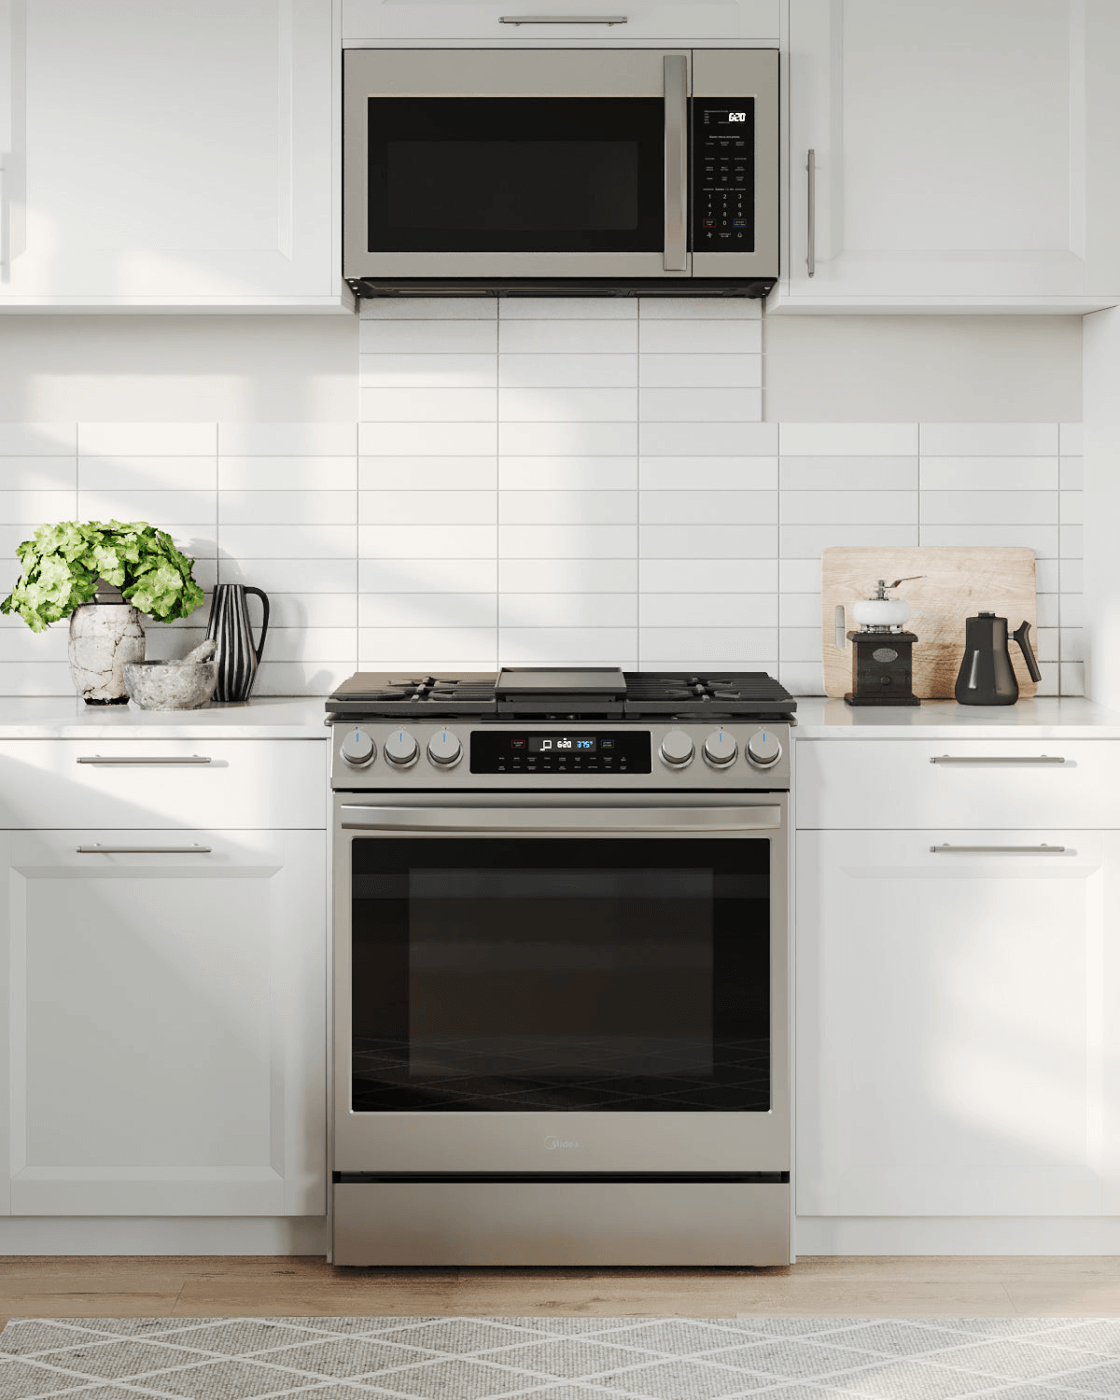 Midea 1.9 Cu. Ft. Over-the-Range Microwave in Stainless Steel (MMO19S3AST) - lifestyle